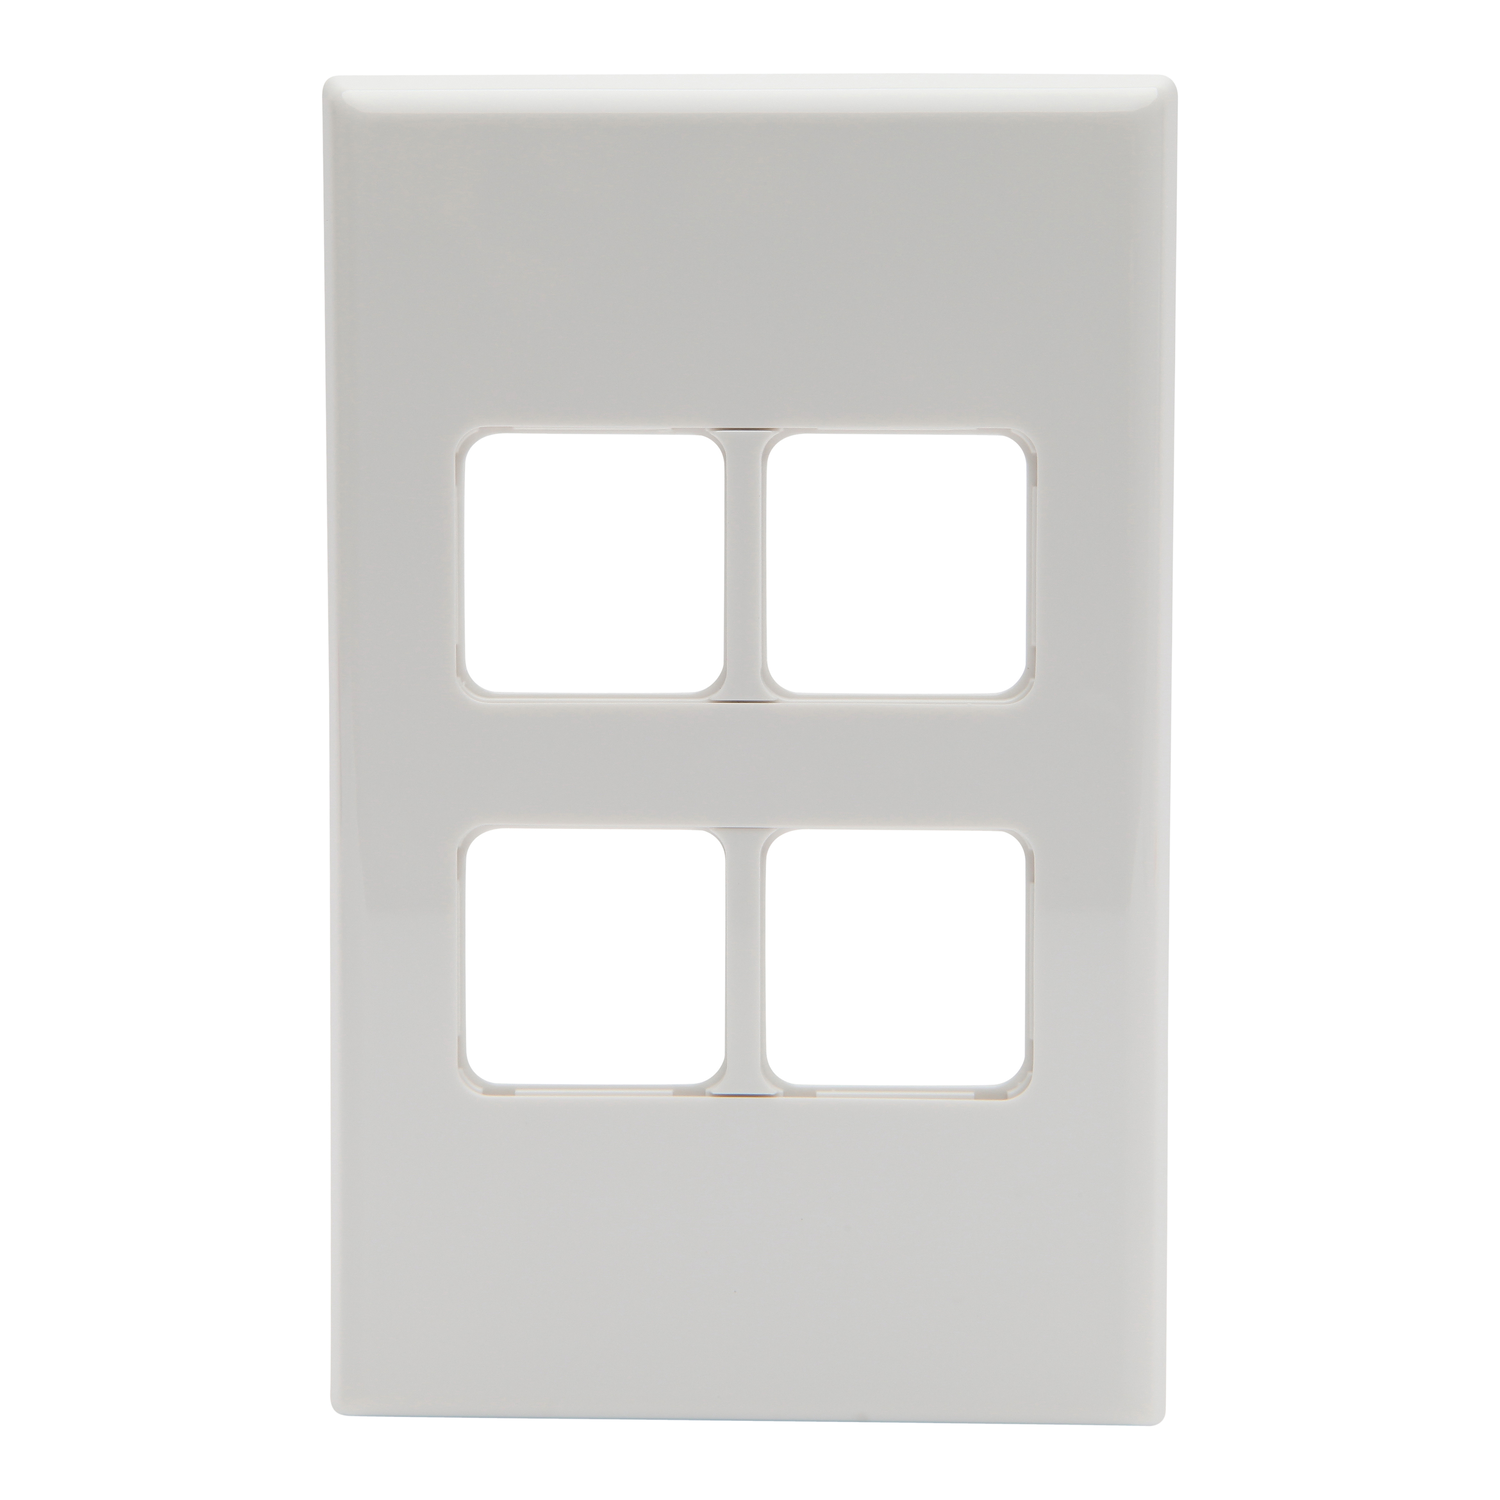 PDL 600 Series - Grid + Cover Plate Switch 4-Gang - White